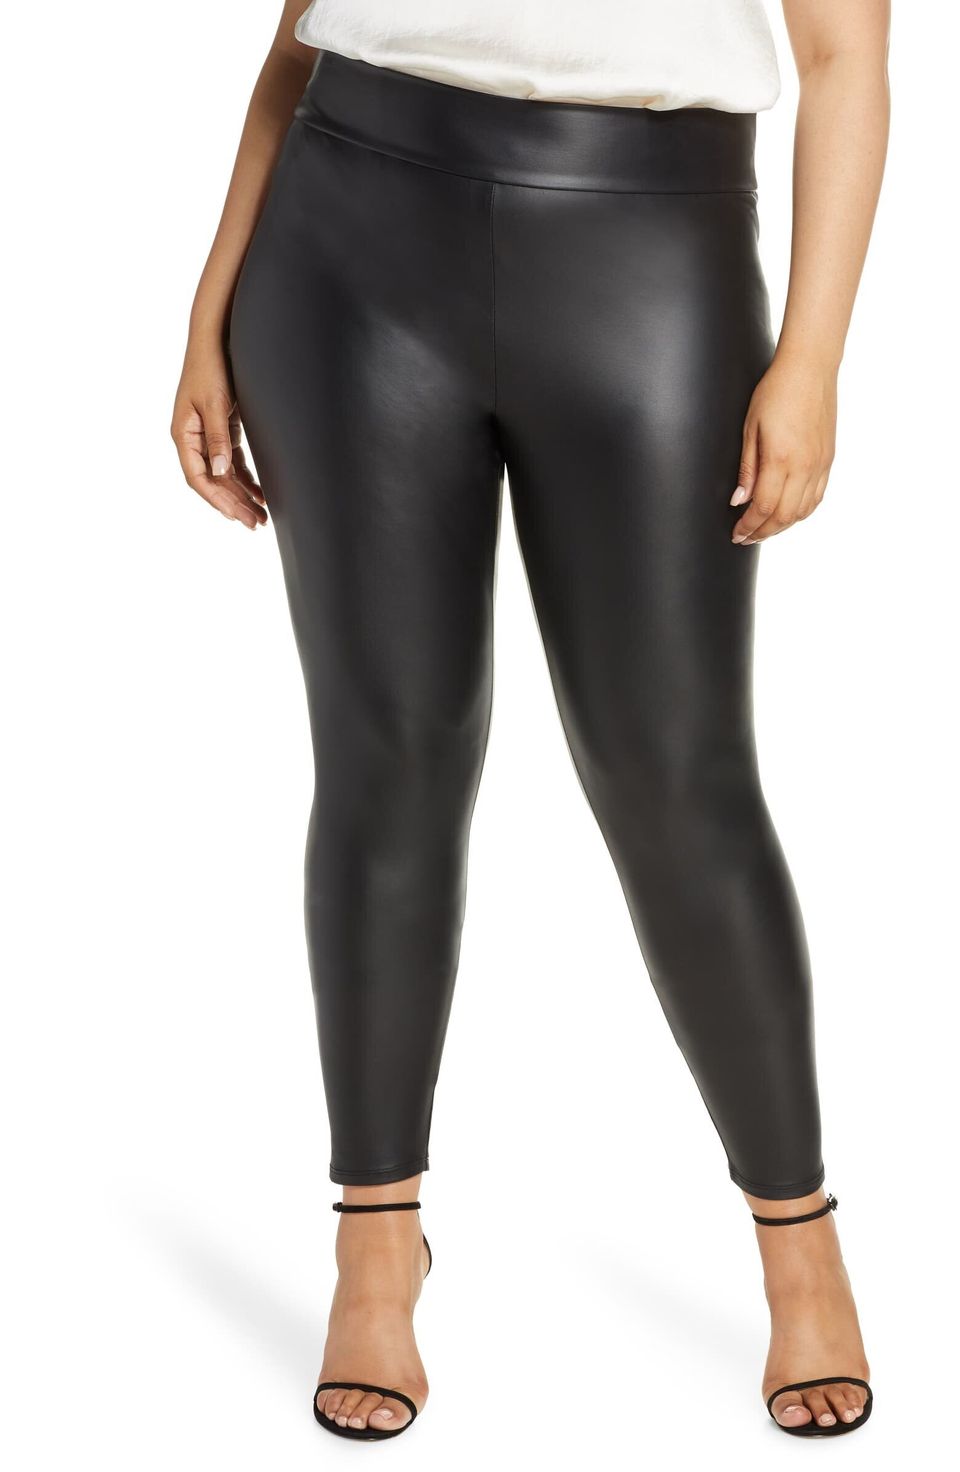 The Best Affordable Alternatives To The Spanx Leather Leggings That ...